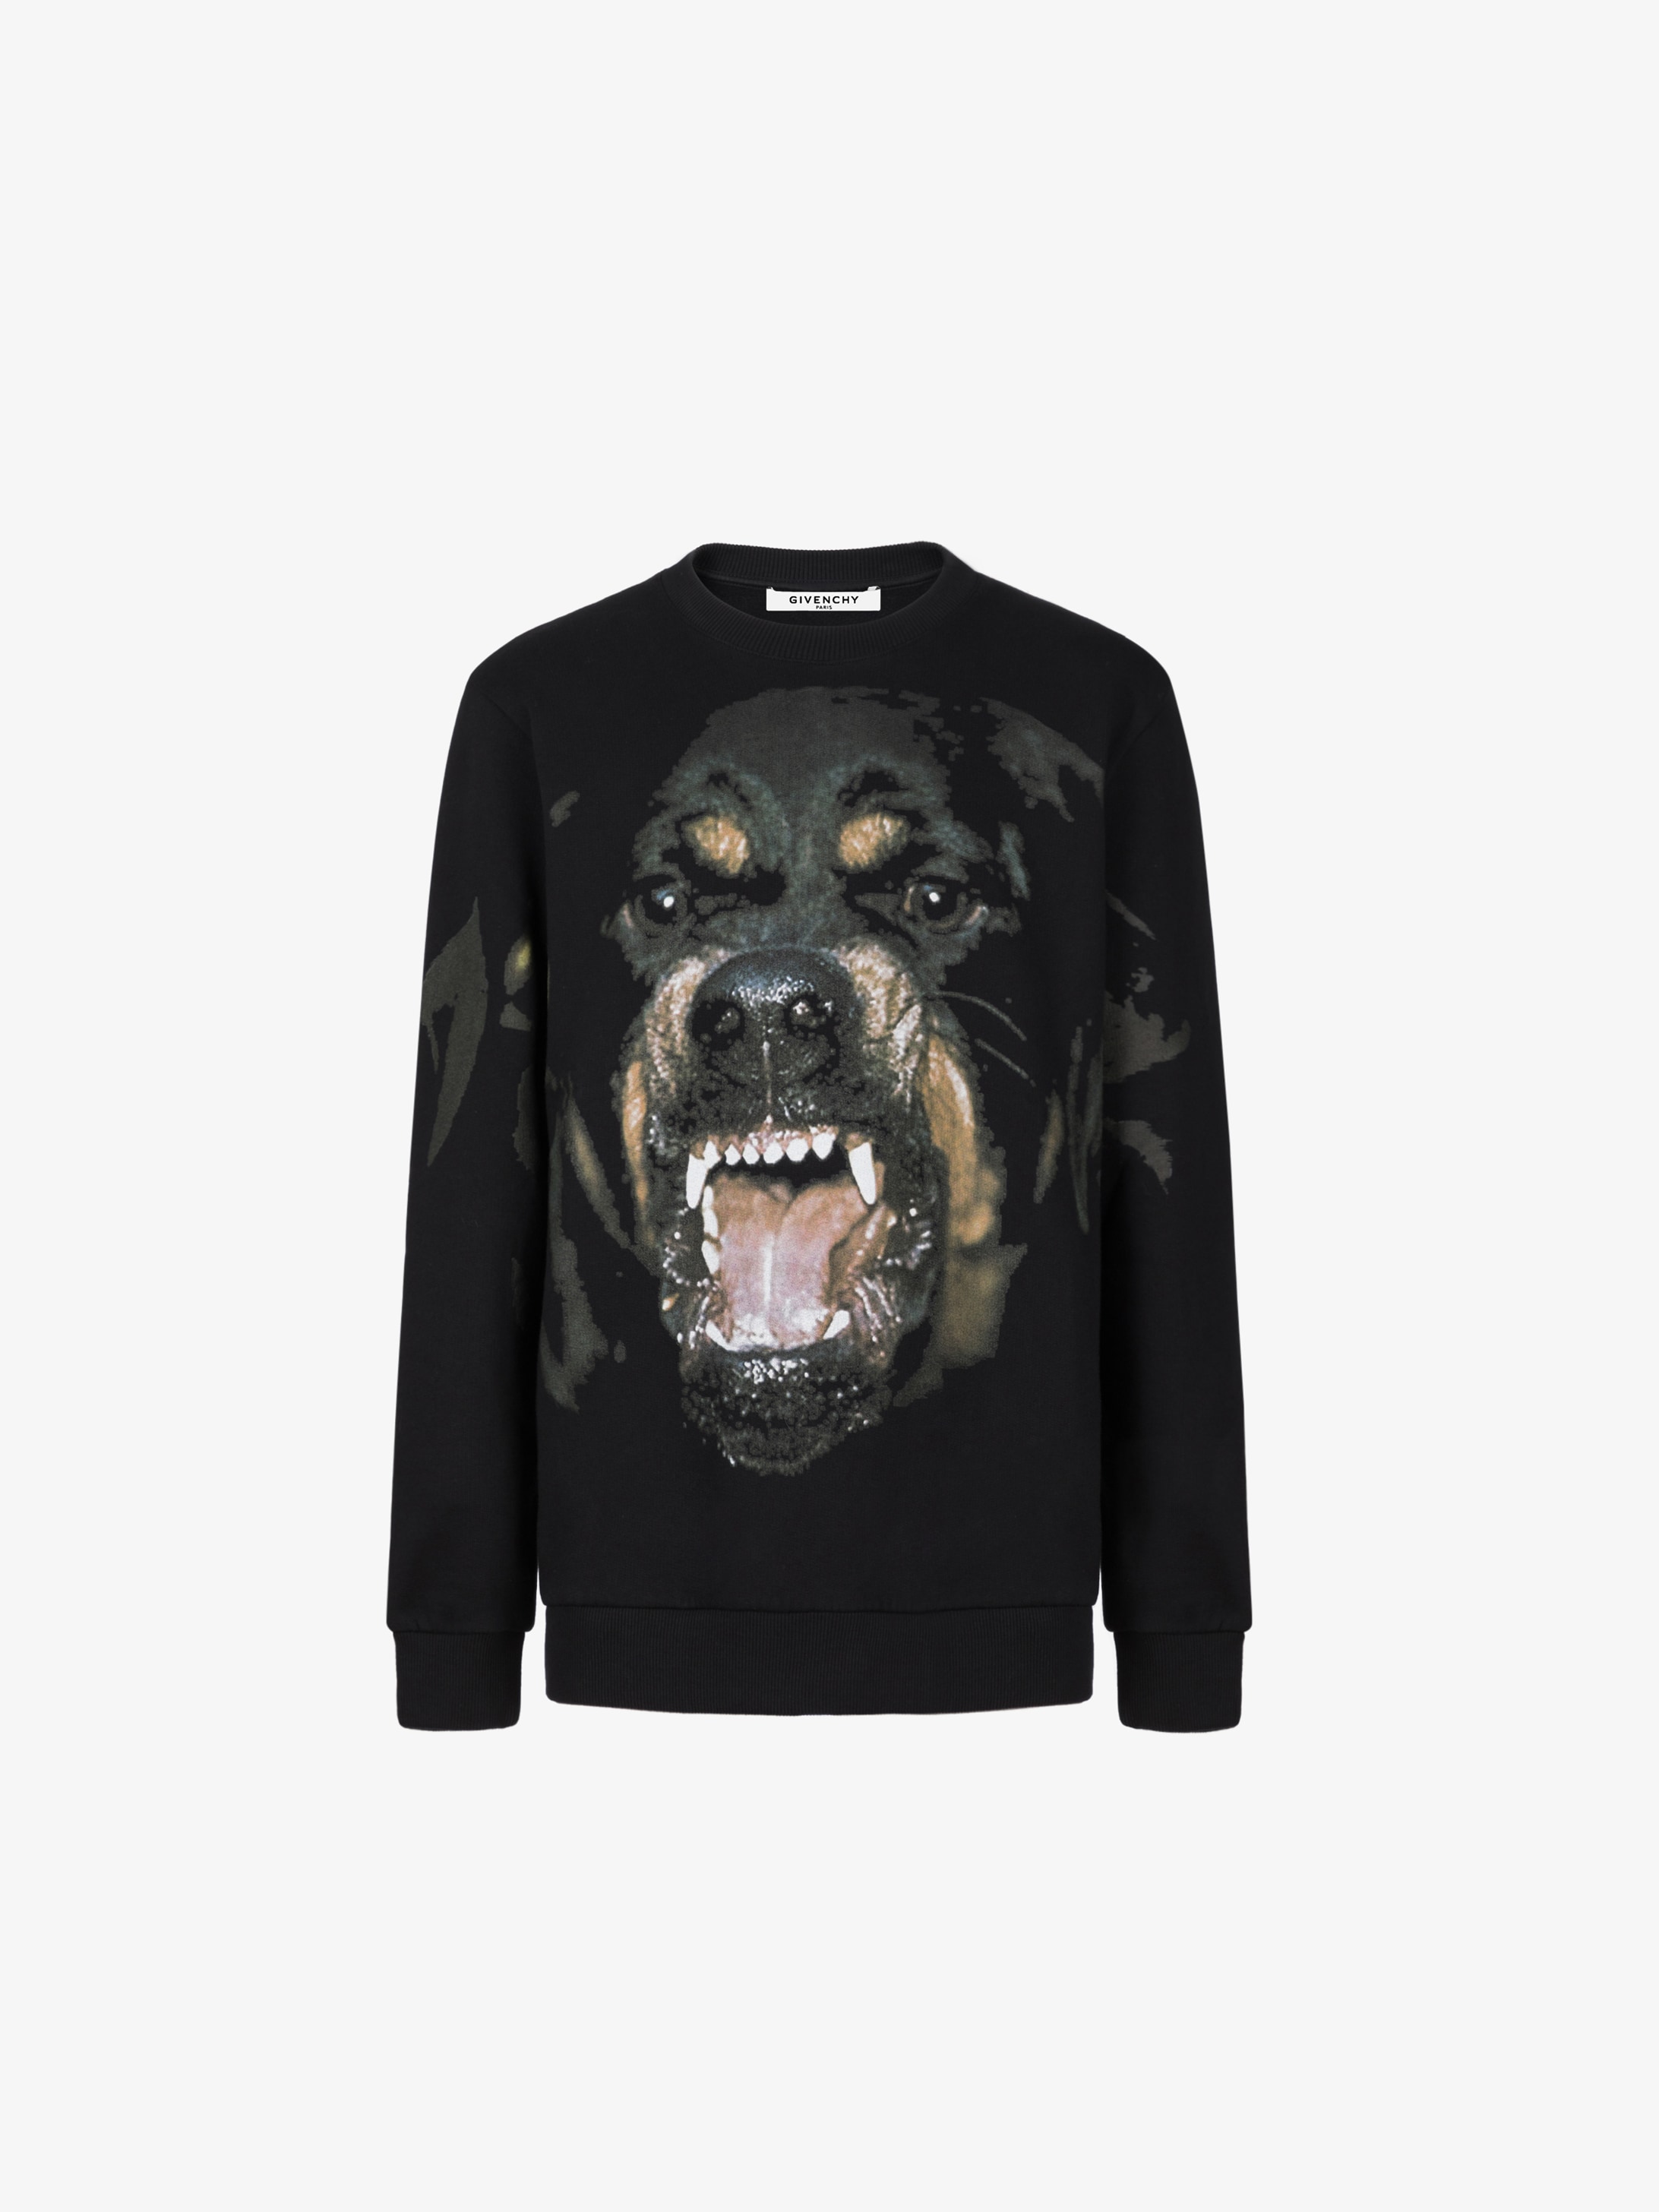 givenchy jumper price